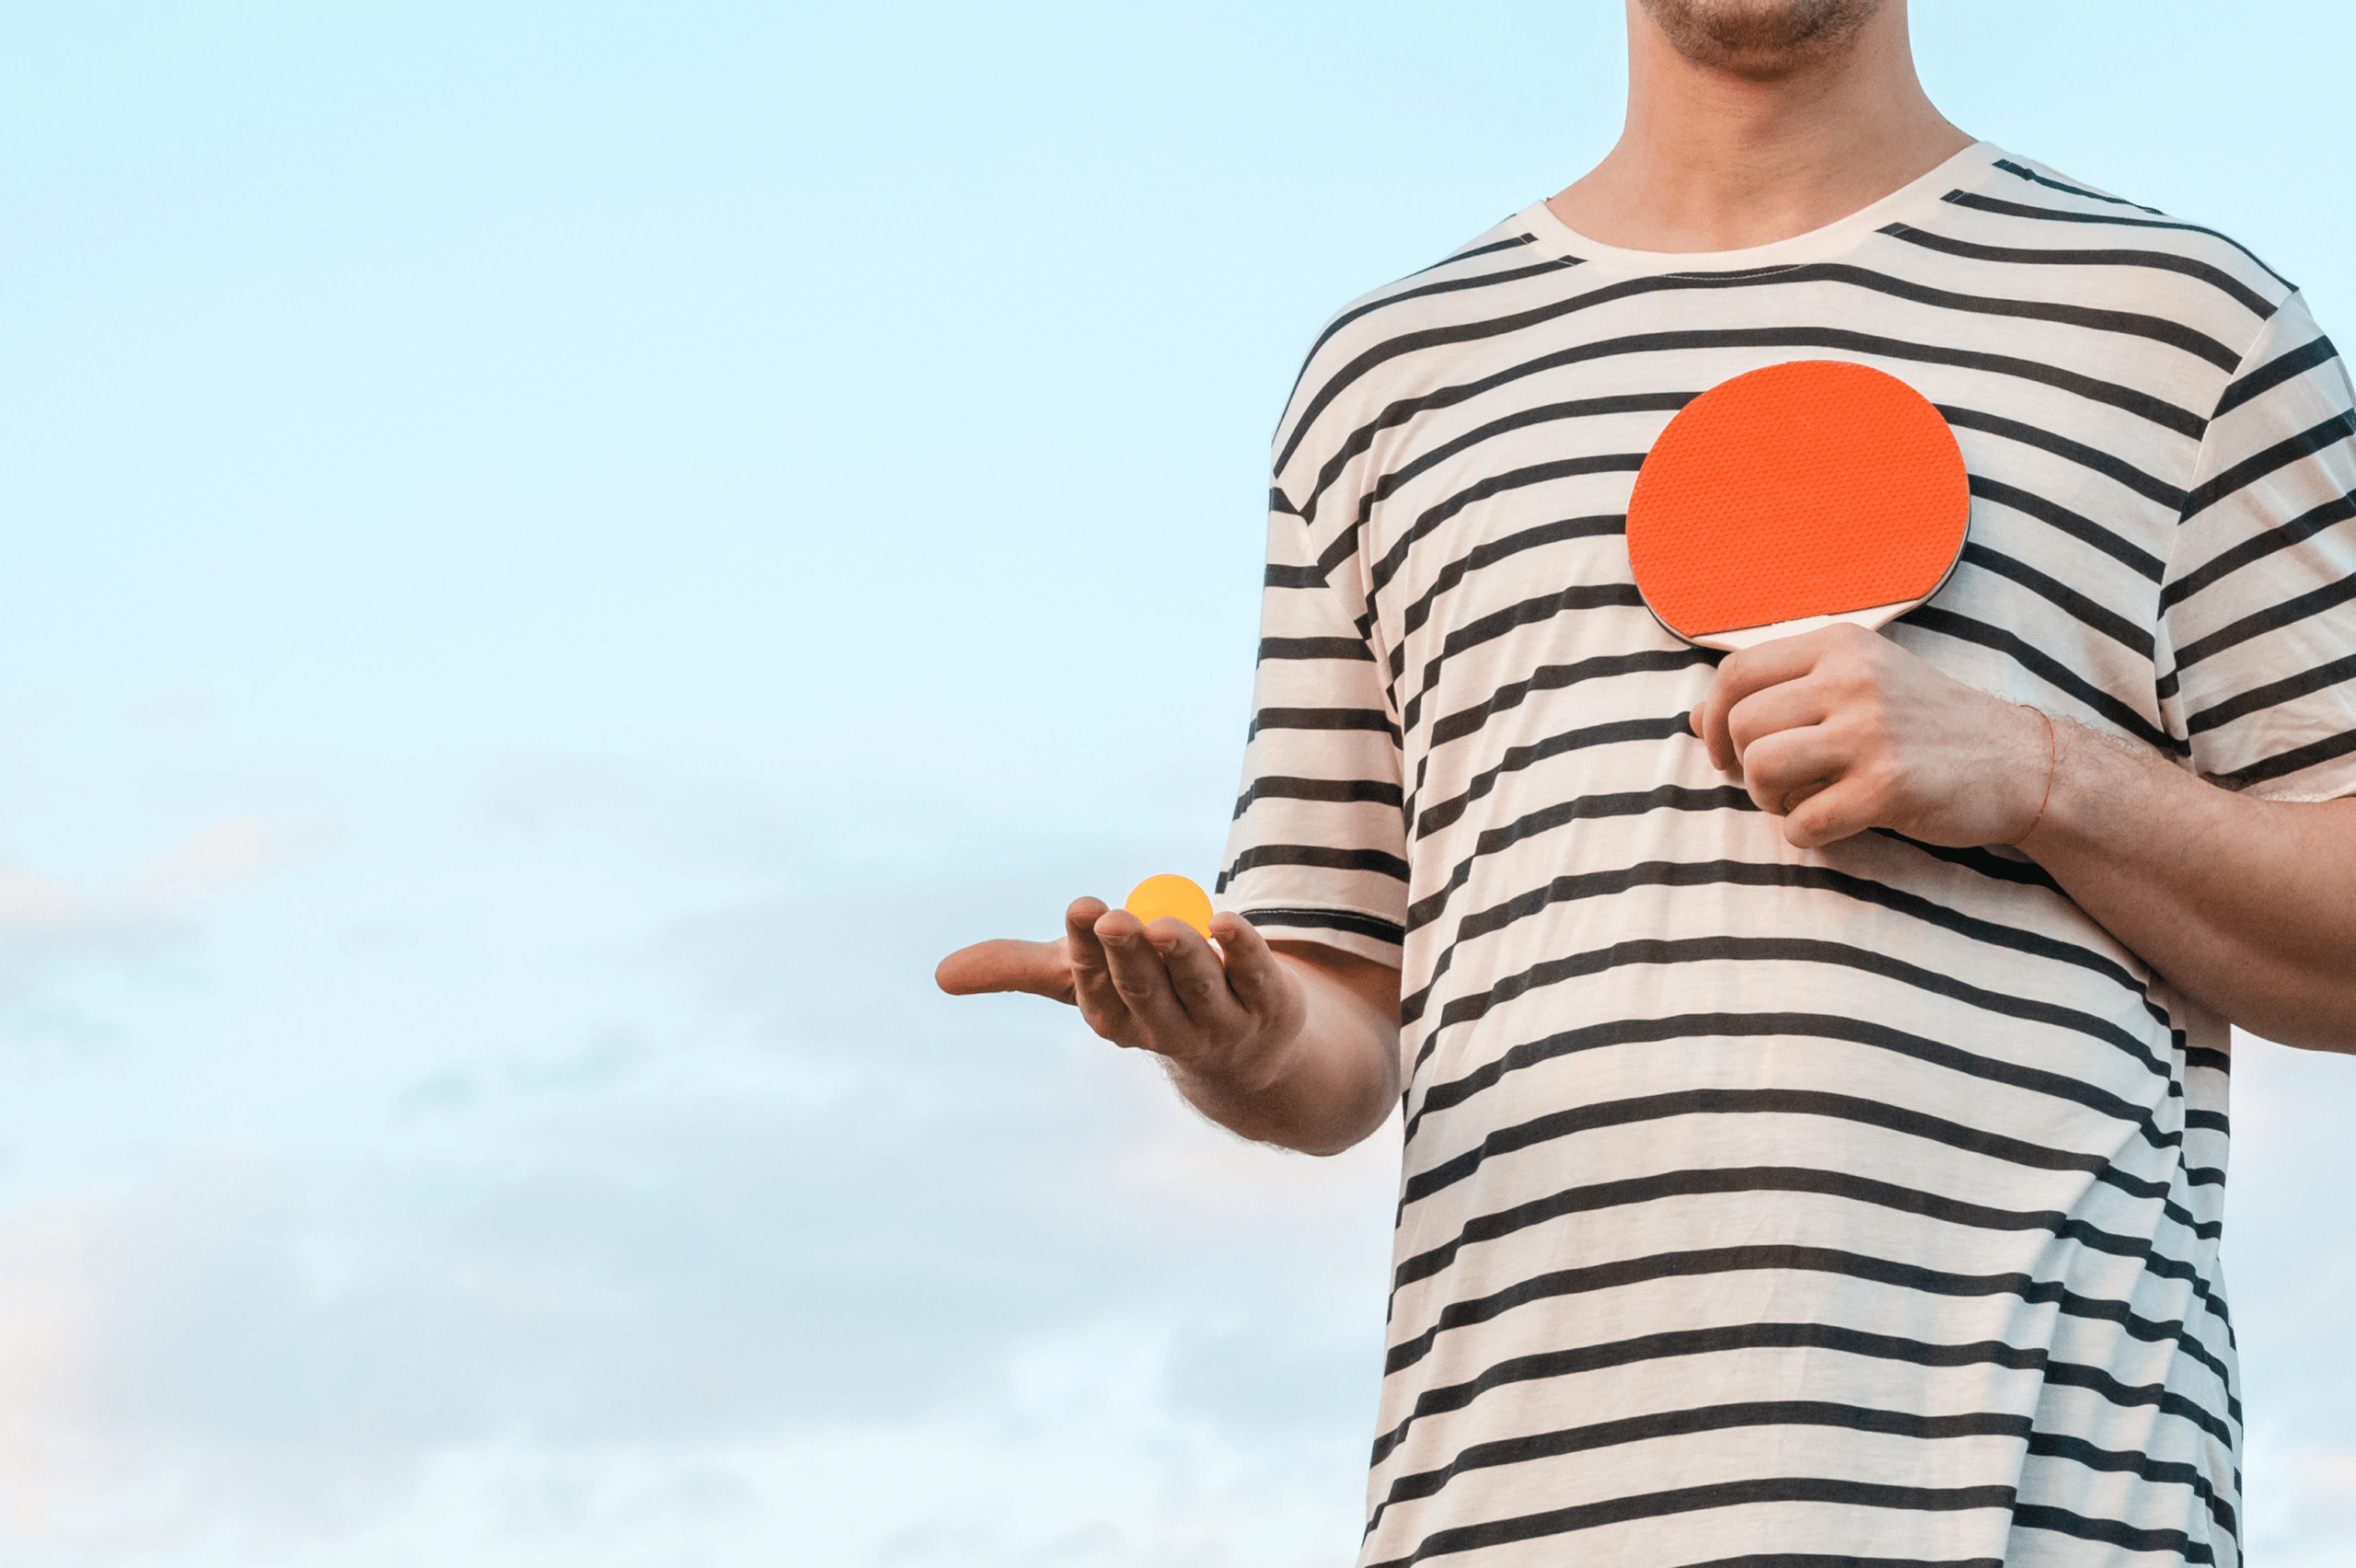 A man in a striped shirt holding a ping pong ball and ping pong paddle